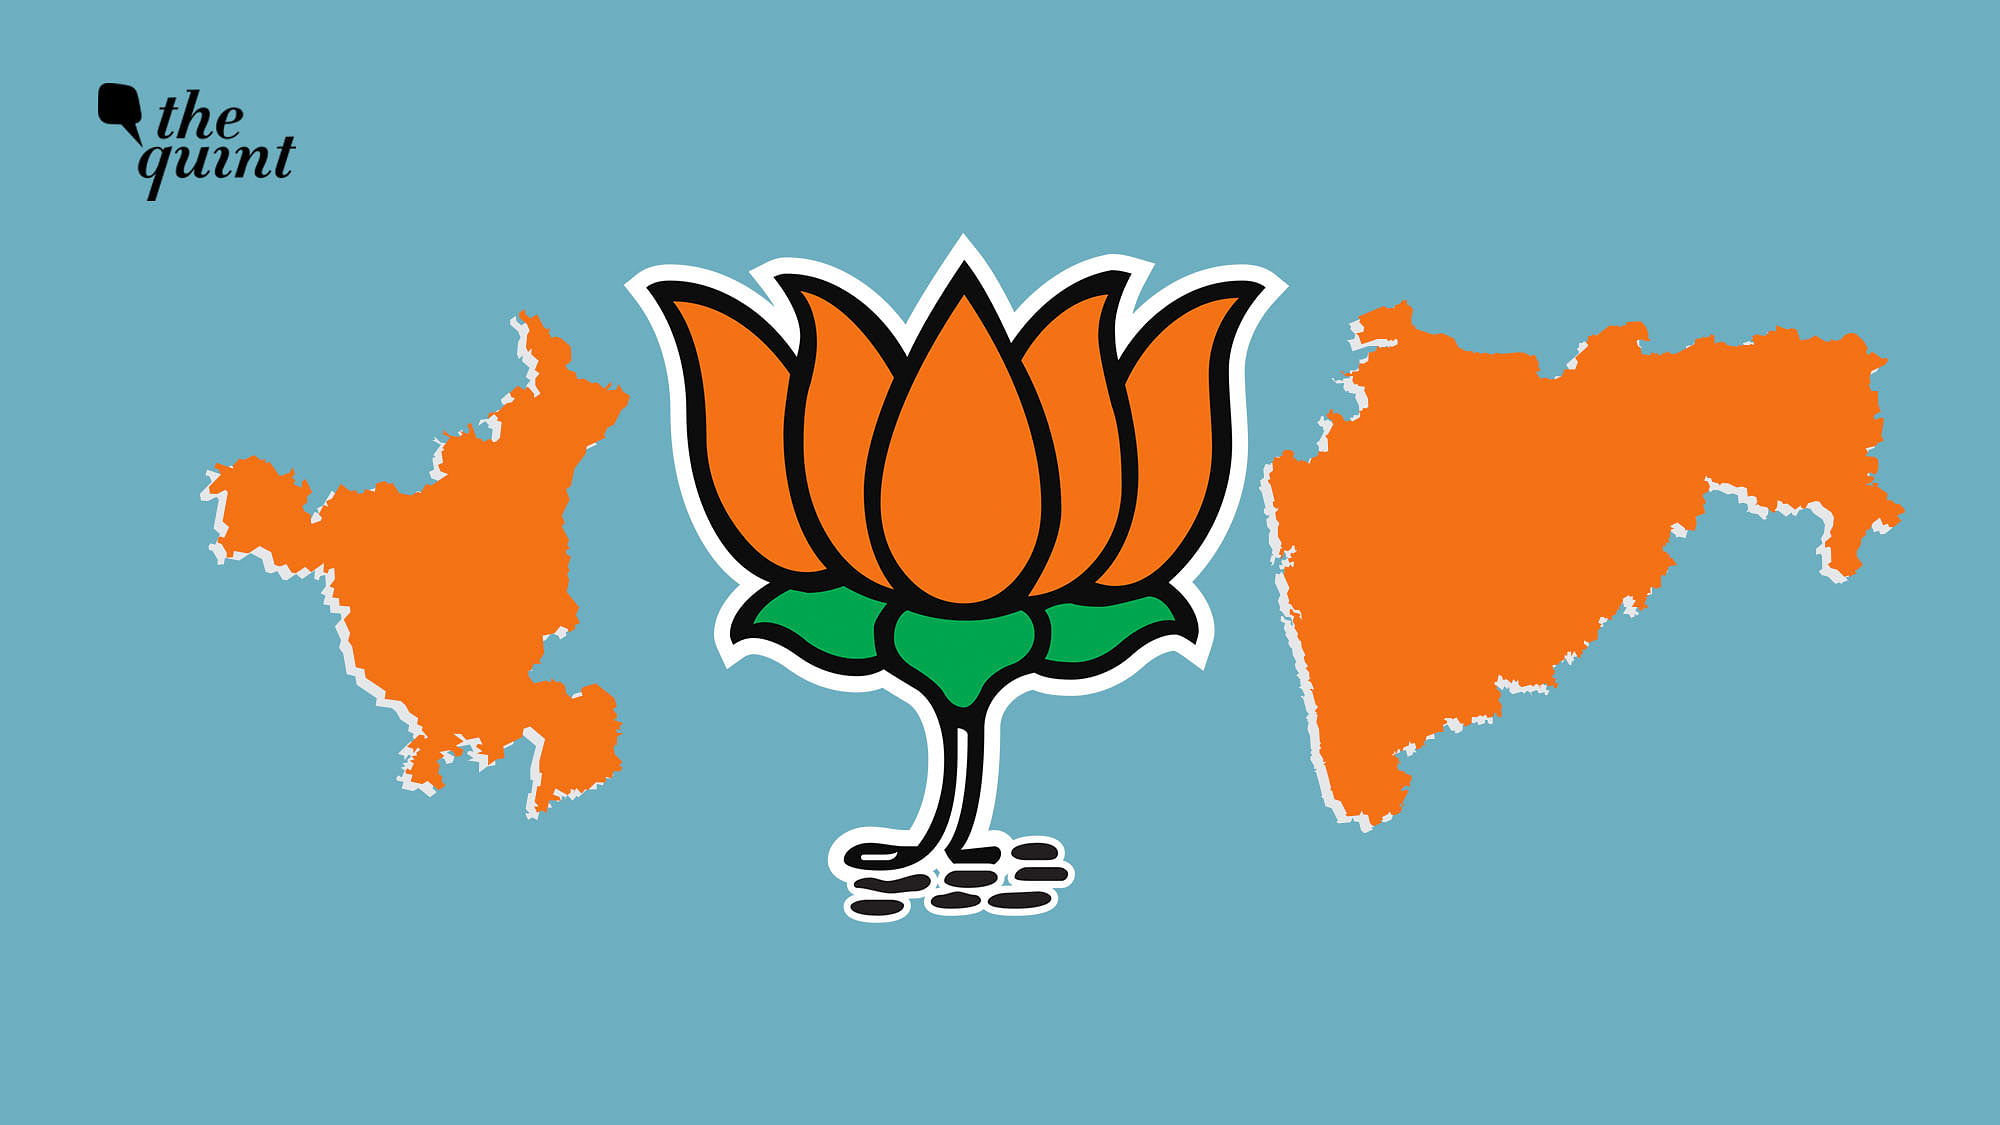 BJP is well placed to win the upcoming Assembly elections in Haryana and Maharashtra.